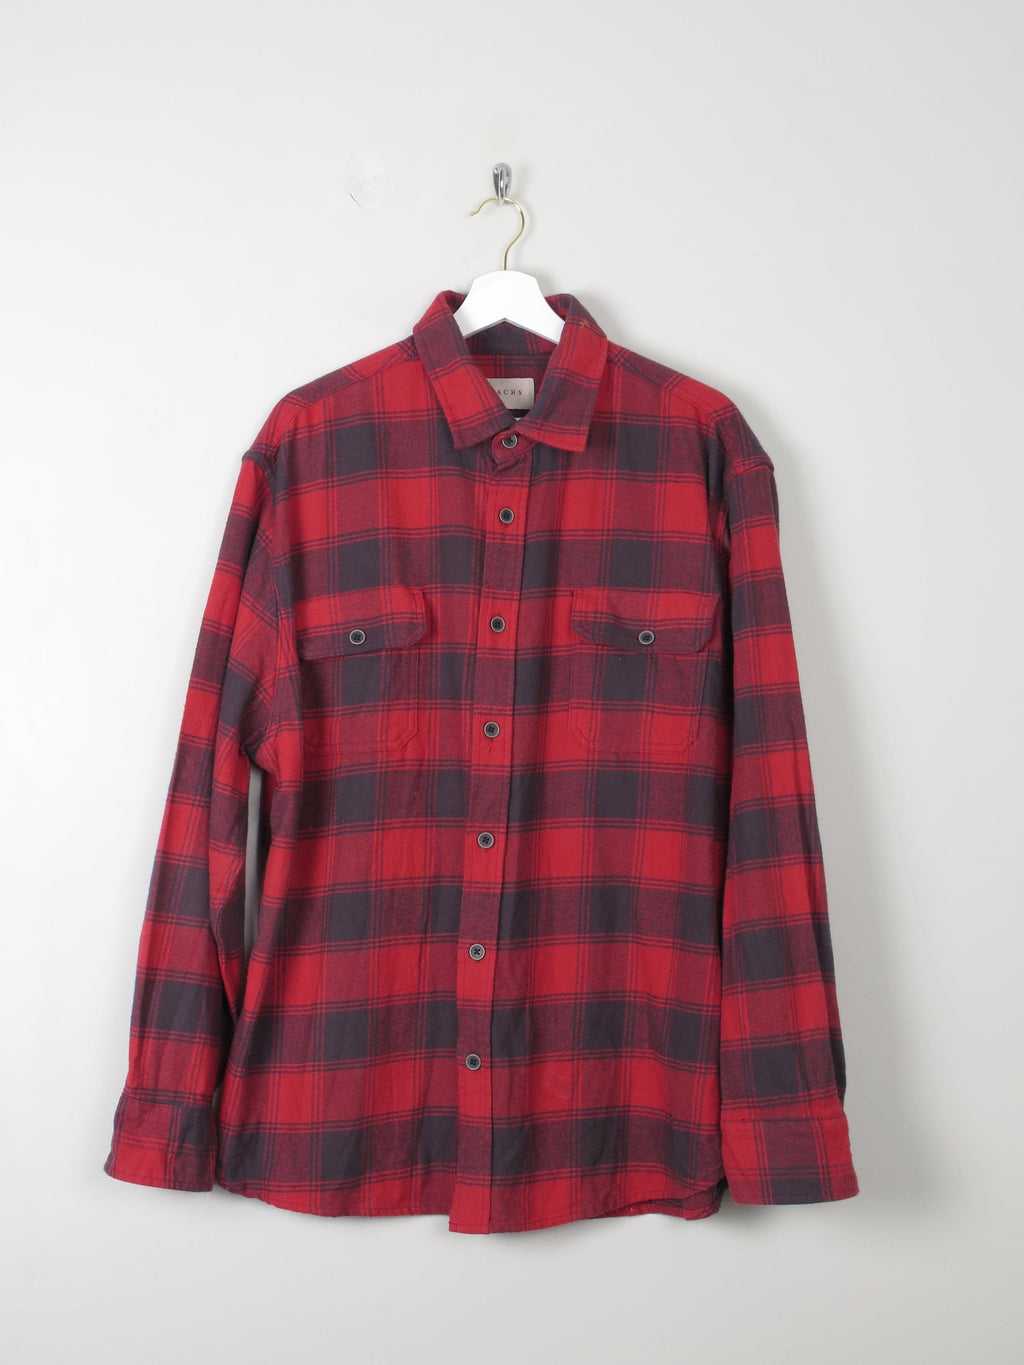 Men's Red Check Flannel Jach's  Shirt XL - The Harlequin